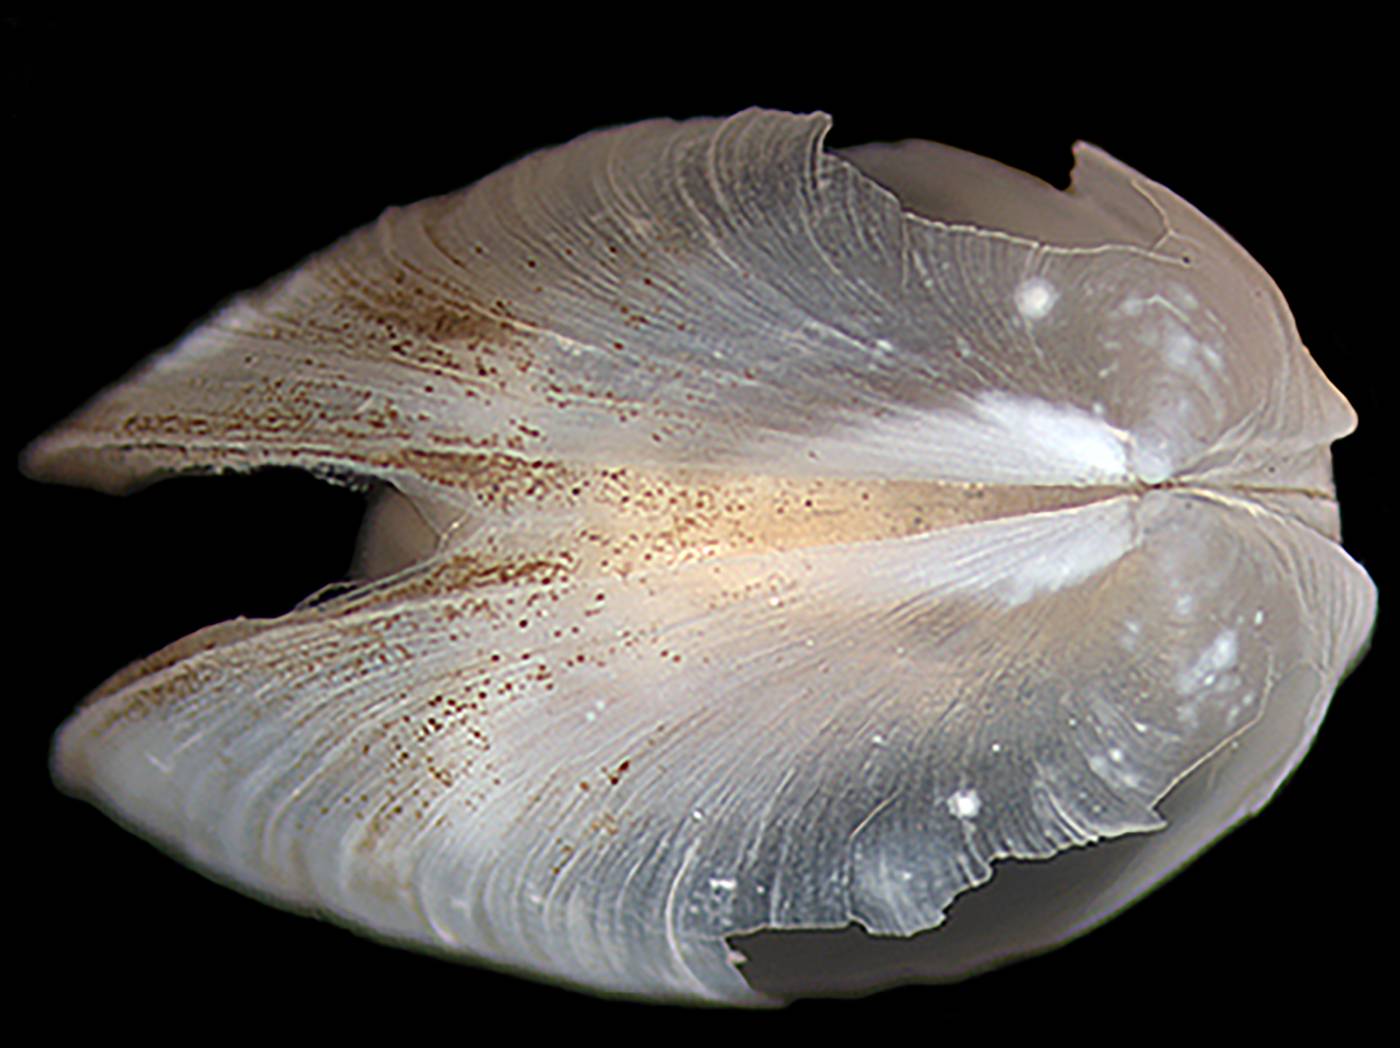 Transparent clams discovered off Hokkaido offer window into